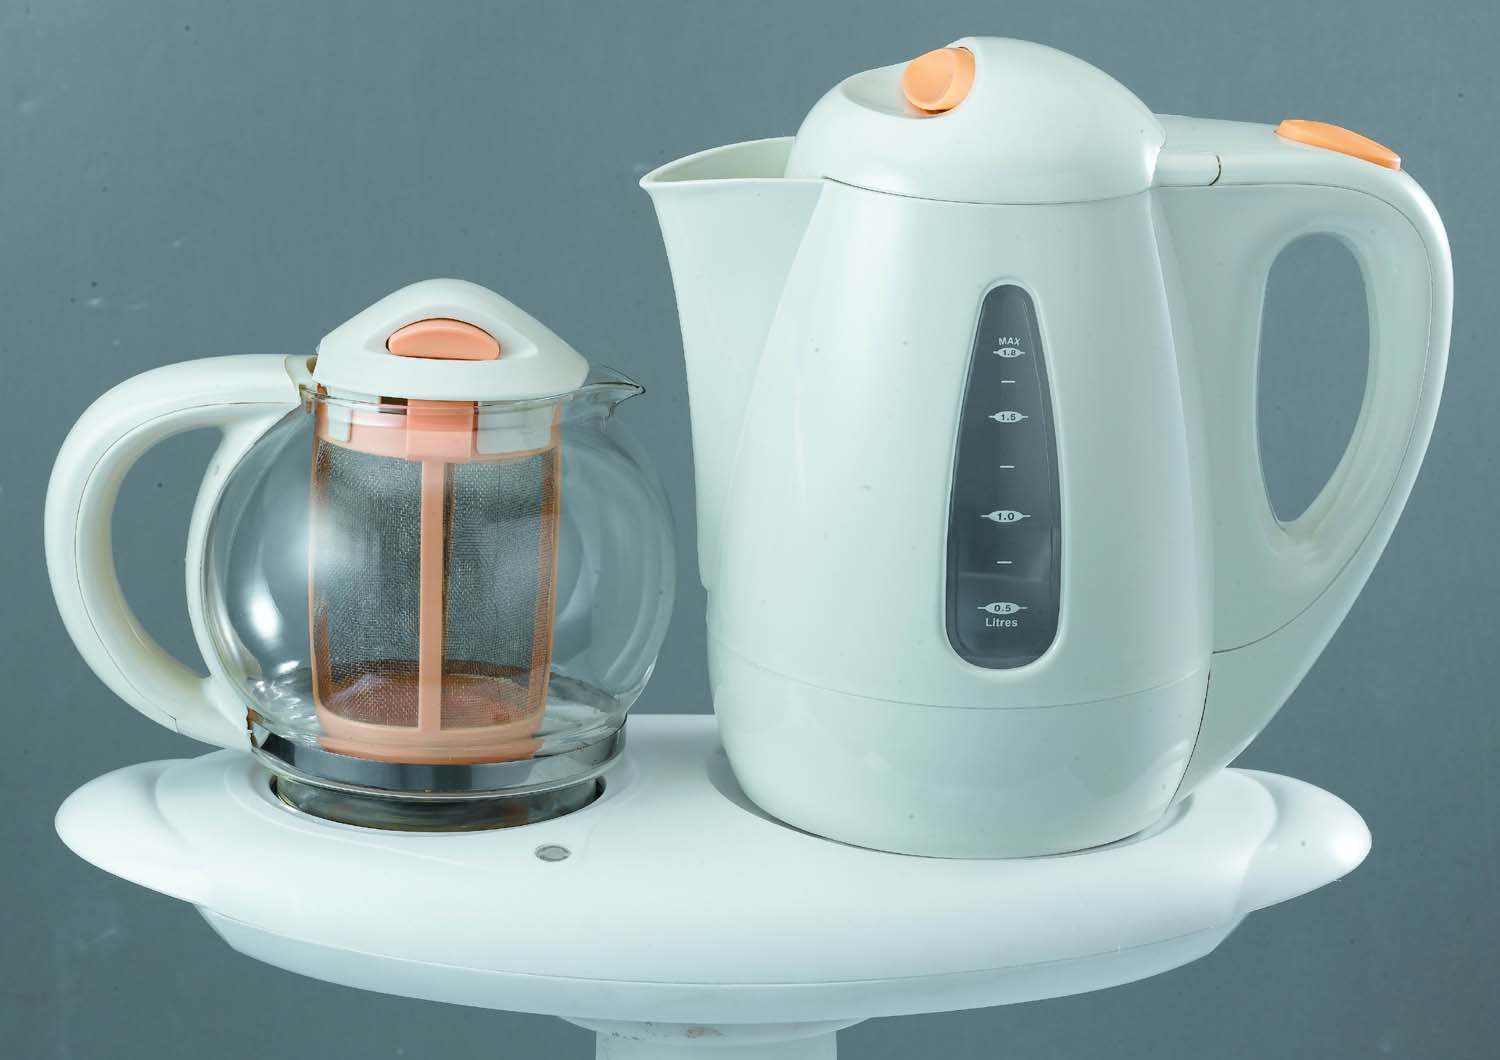 Full sets of Electric Kettle